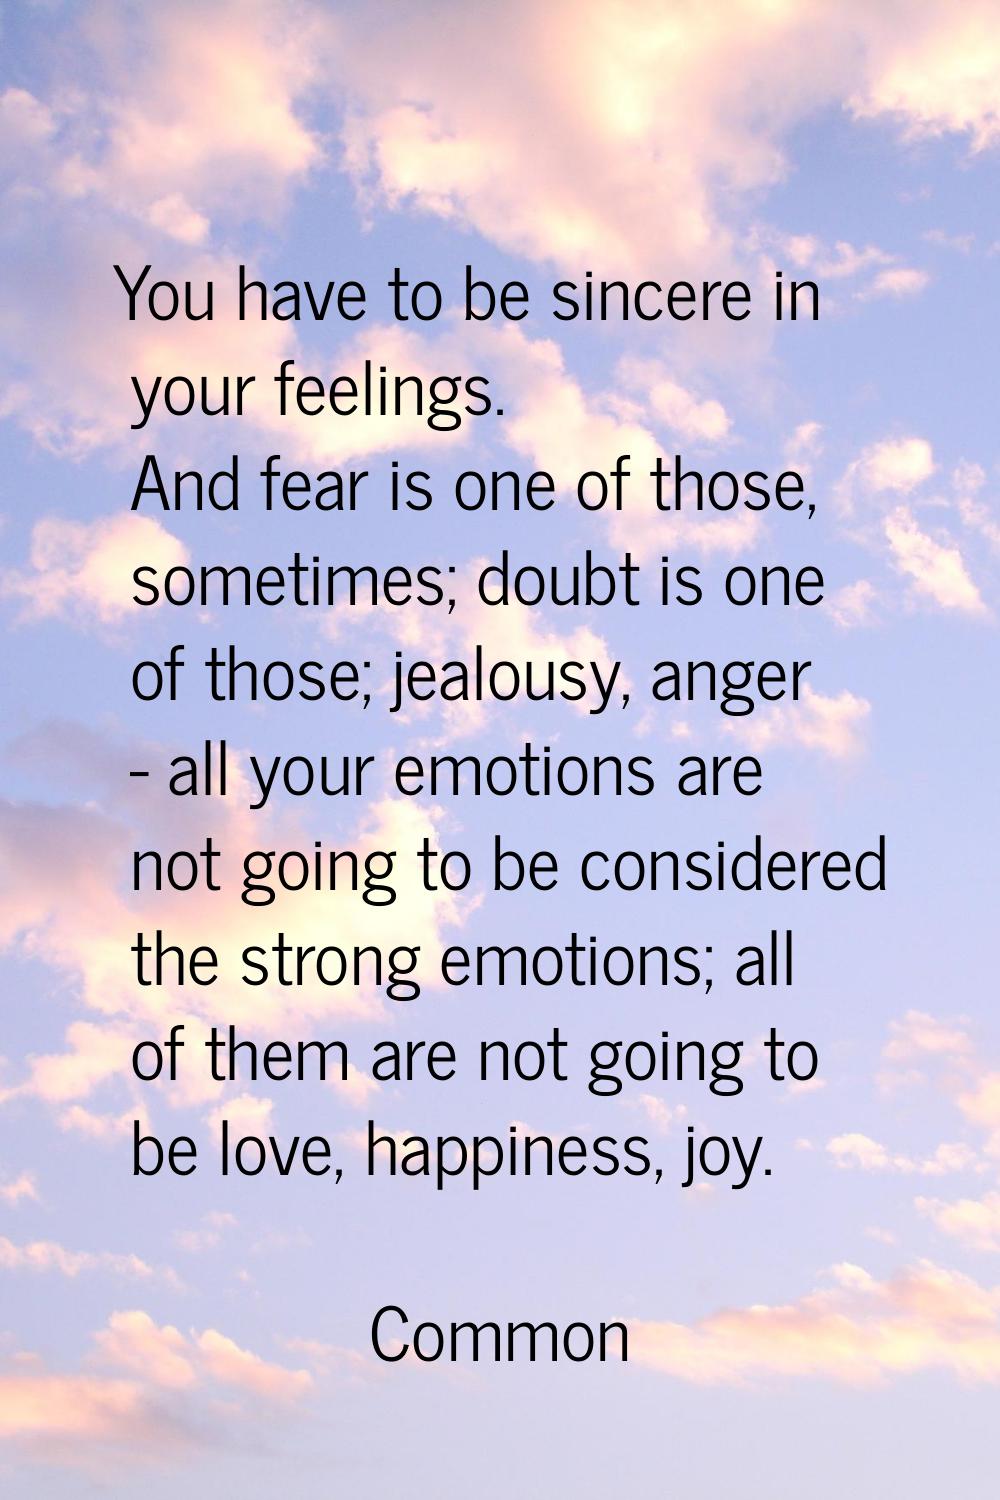 You have to be sincere in your feelings. And fear is one of those, sometimes; doubt is one of those